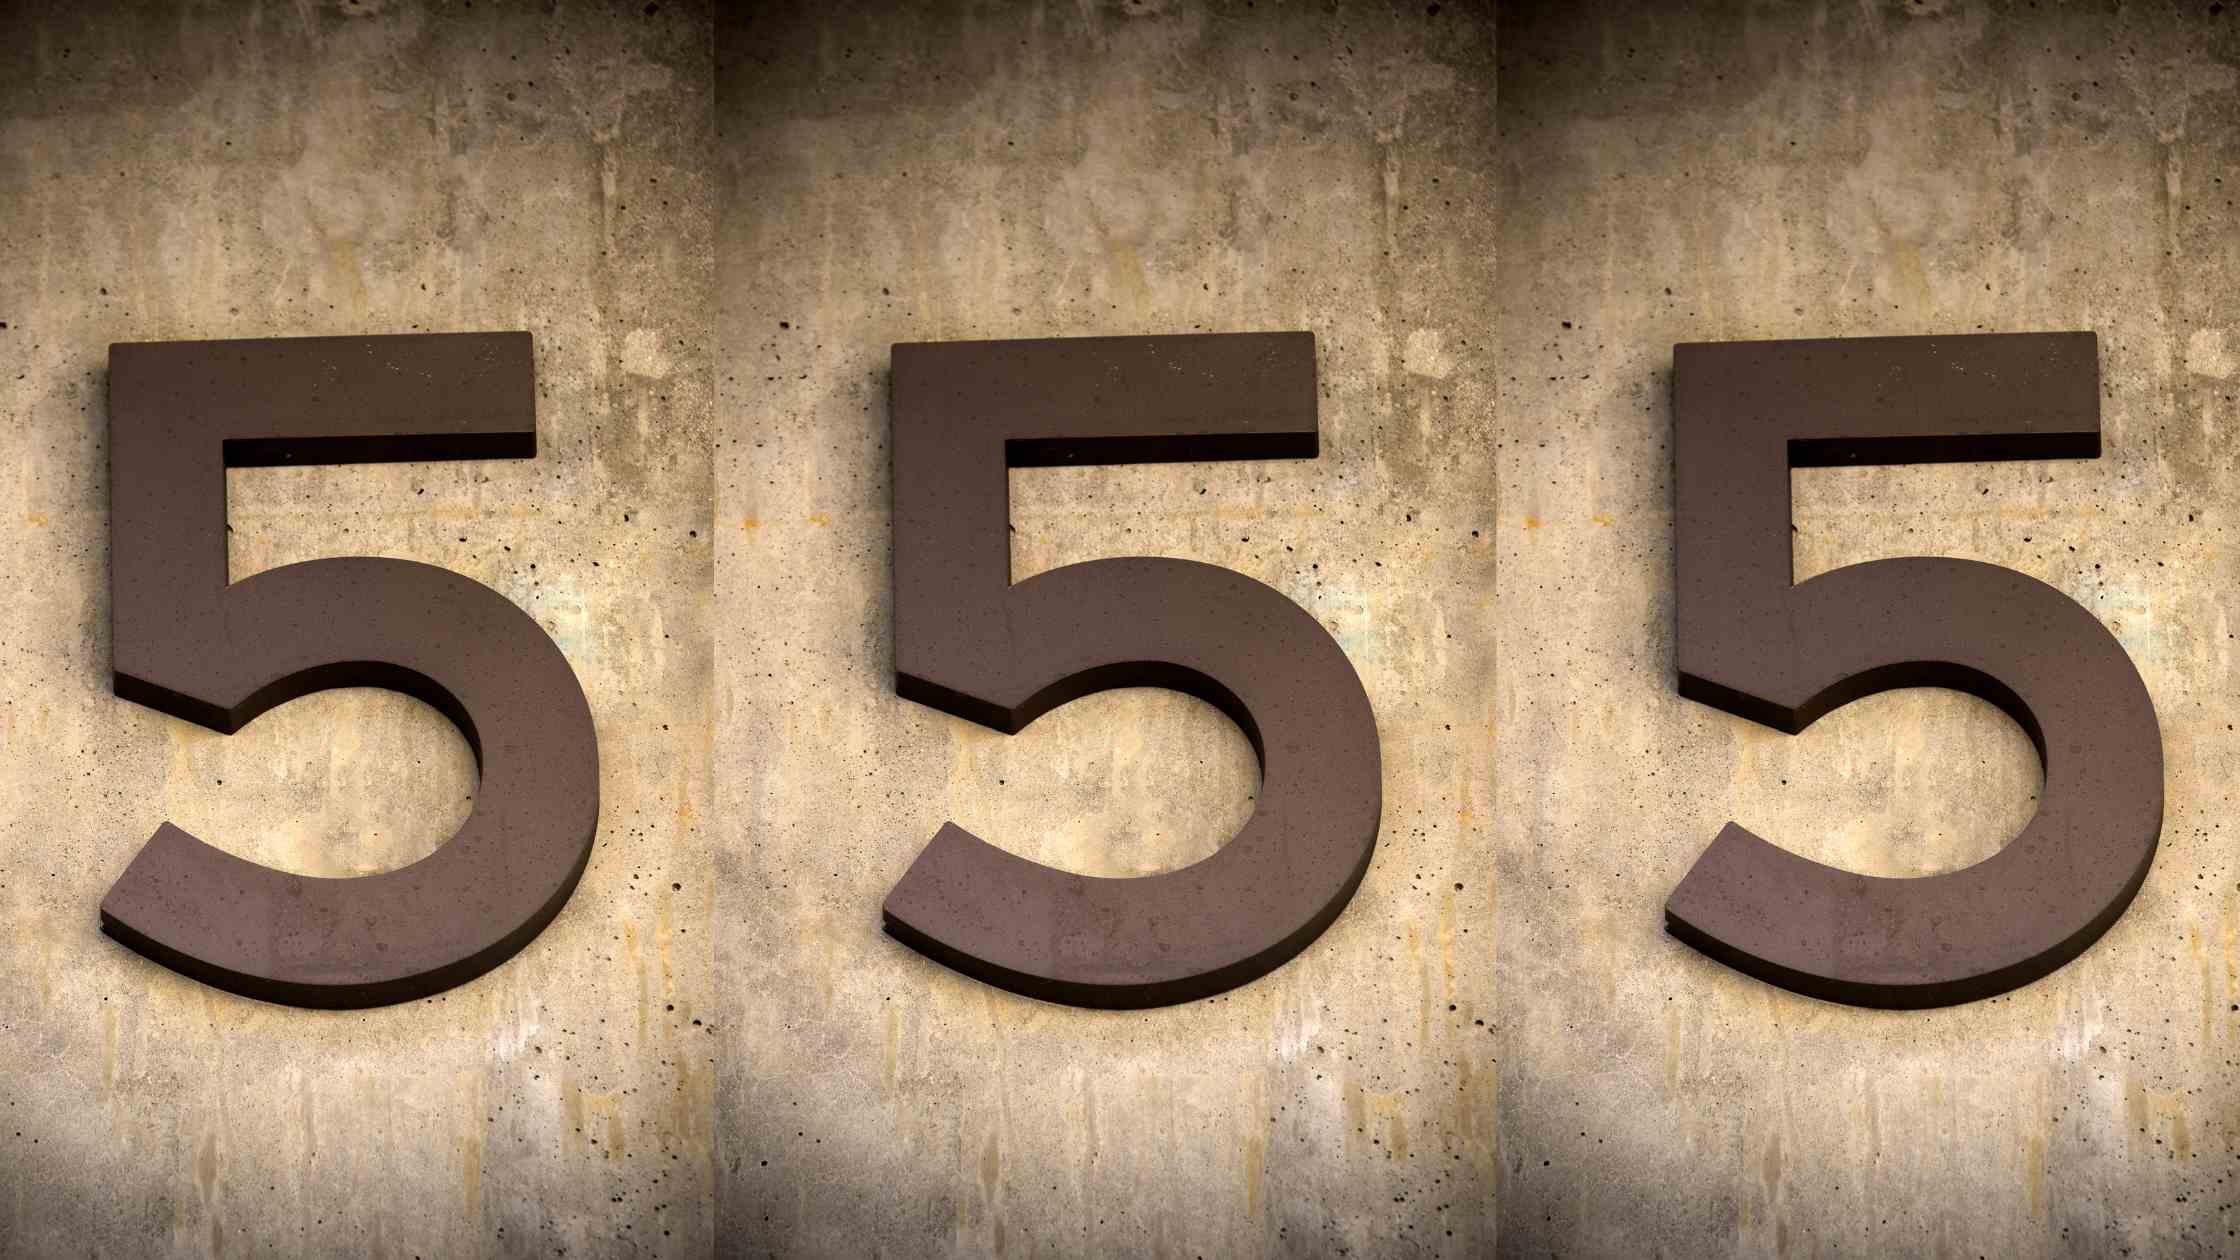 What Does 555 Mean in Manifestation